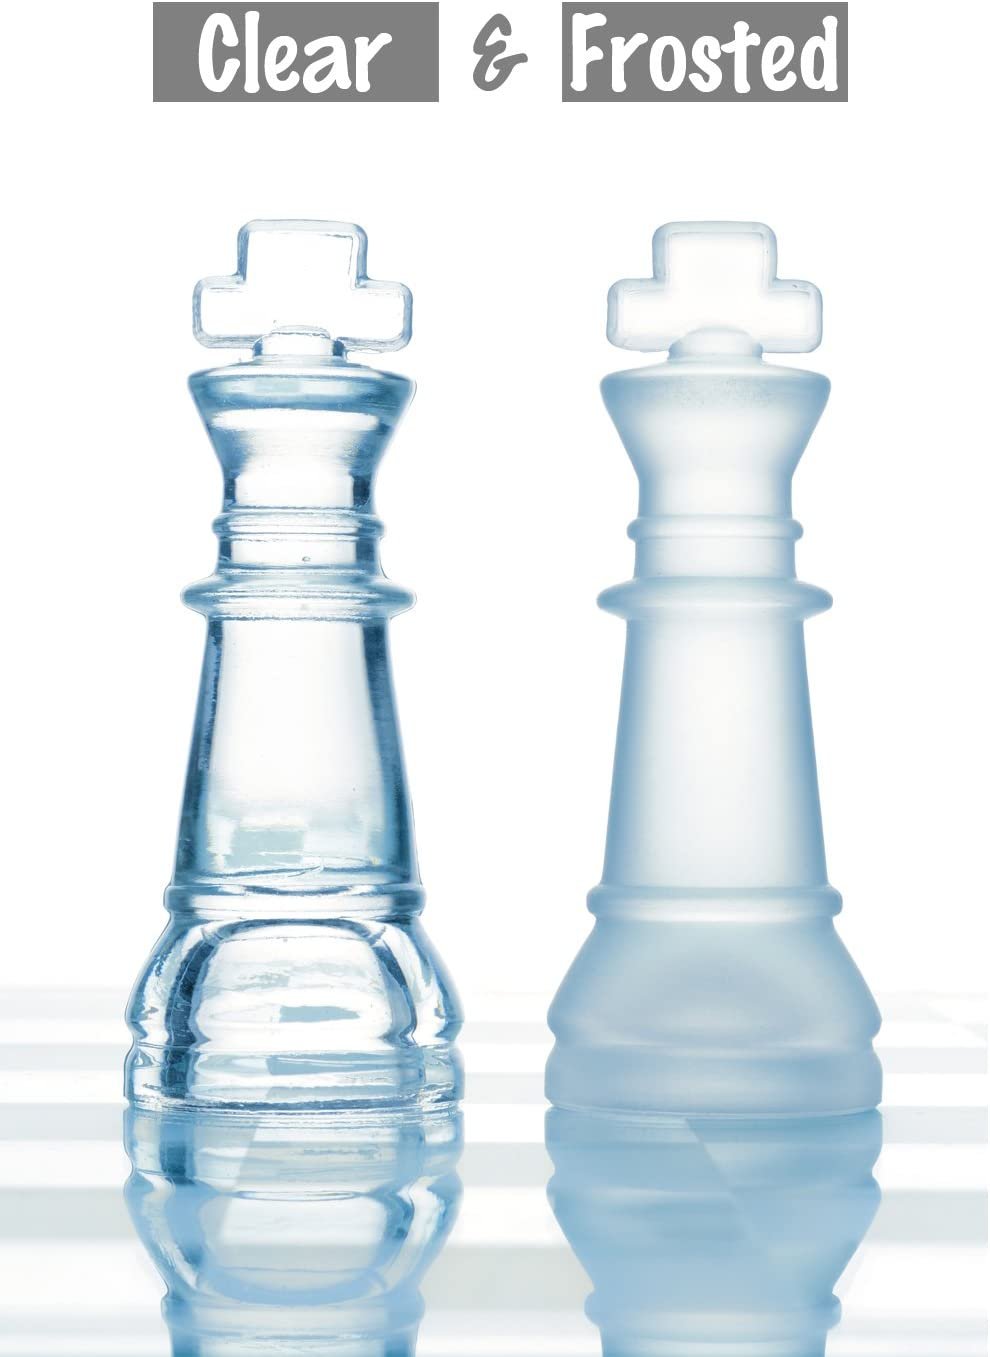 Gamie 7.5 Inch Glass Chess Set, Elegant Design - Durable Build - Fully Functional Chess - 32 Frosted and Clear Pieces - Felted Bottoms - Easy to Carry - Reassuringly Stable